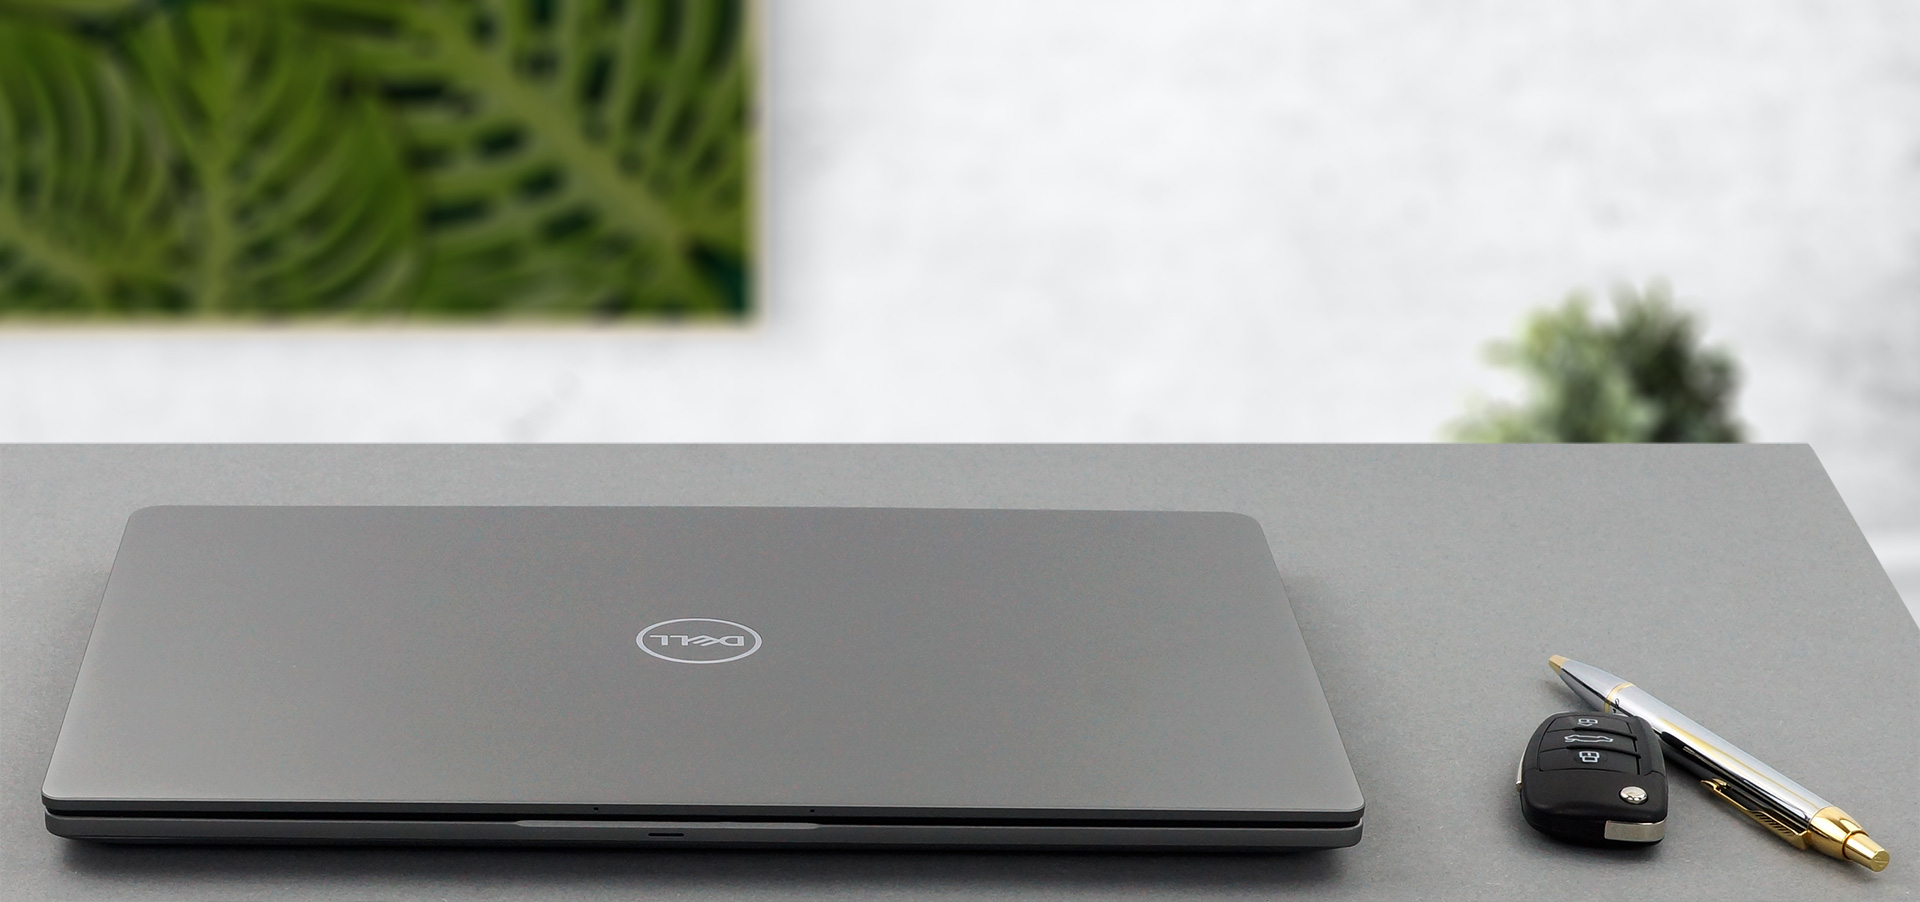 Top 5 reasons to BUY or NOT to buy the Dell Latitude 13 7310 |  